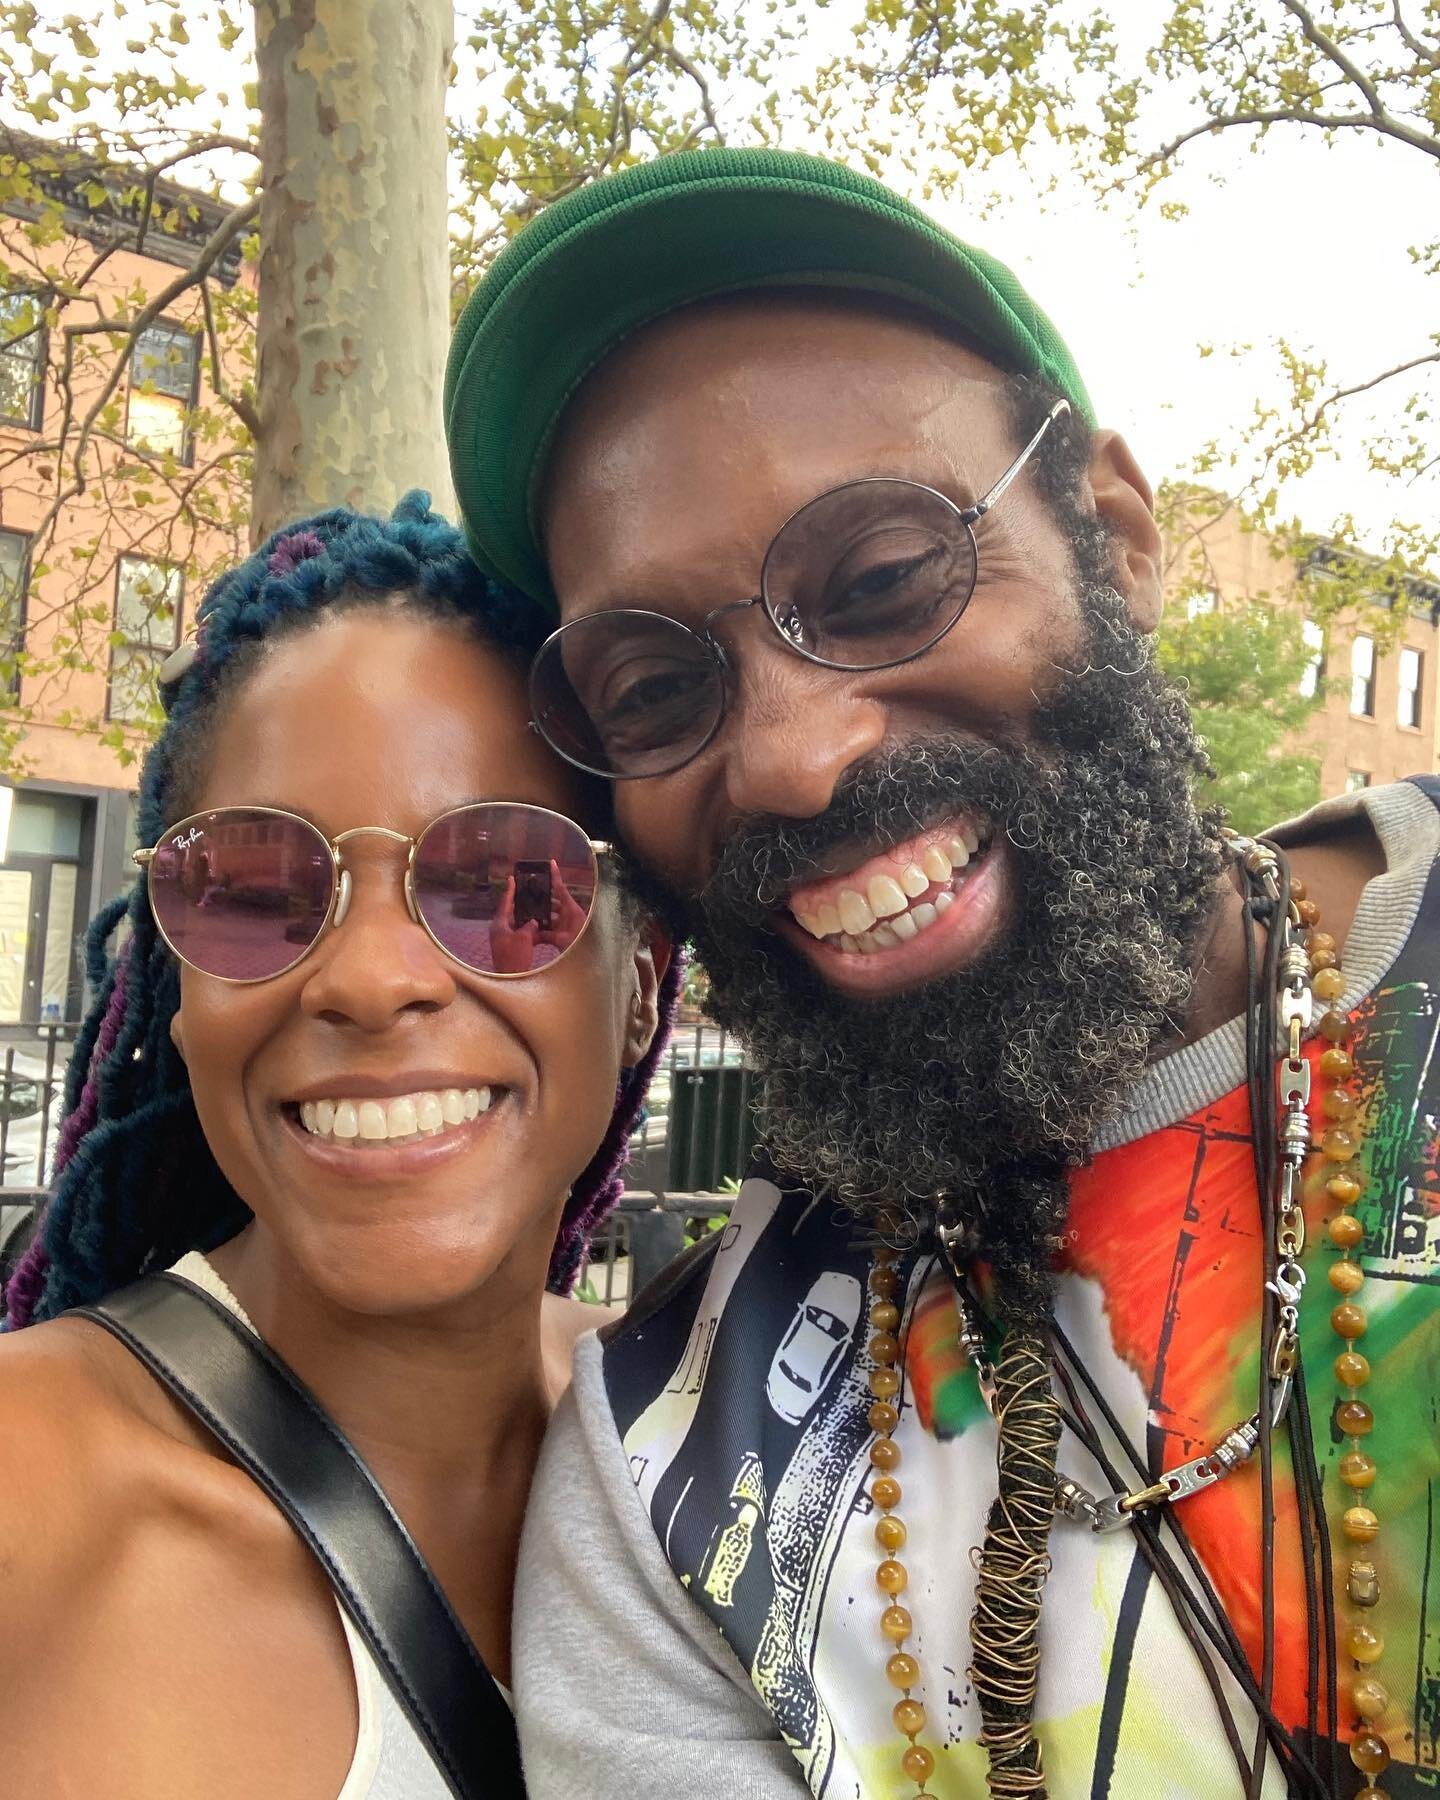 To my dearest @omboogie ! Happy HAPPY HAPPIEST BIRTHDAY TO YOU!!!! 🎂 

We have an unexplainable ancestral connection that makes me believe we have lived many lives together!! Traveling, laughing, lots of music + dancing, countless dinners at the bea